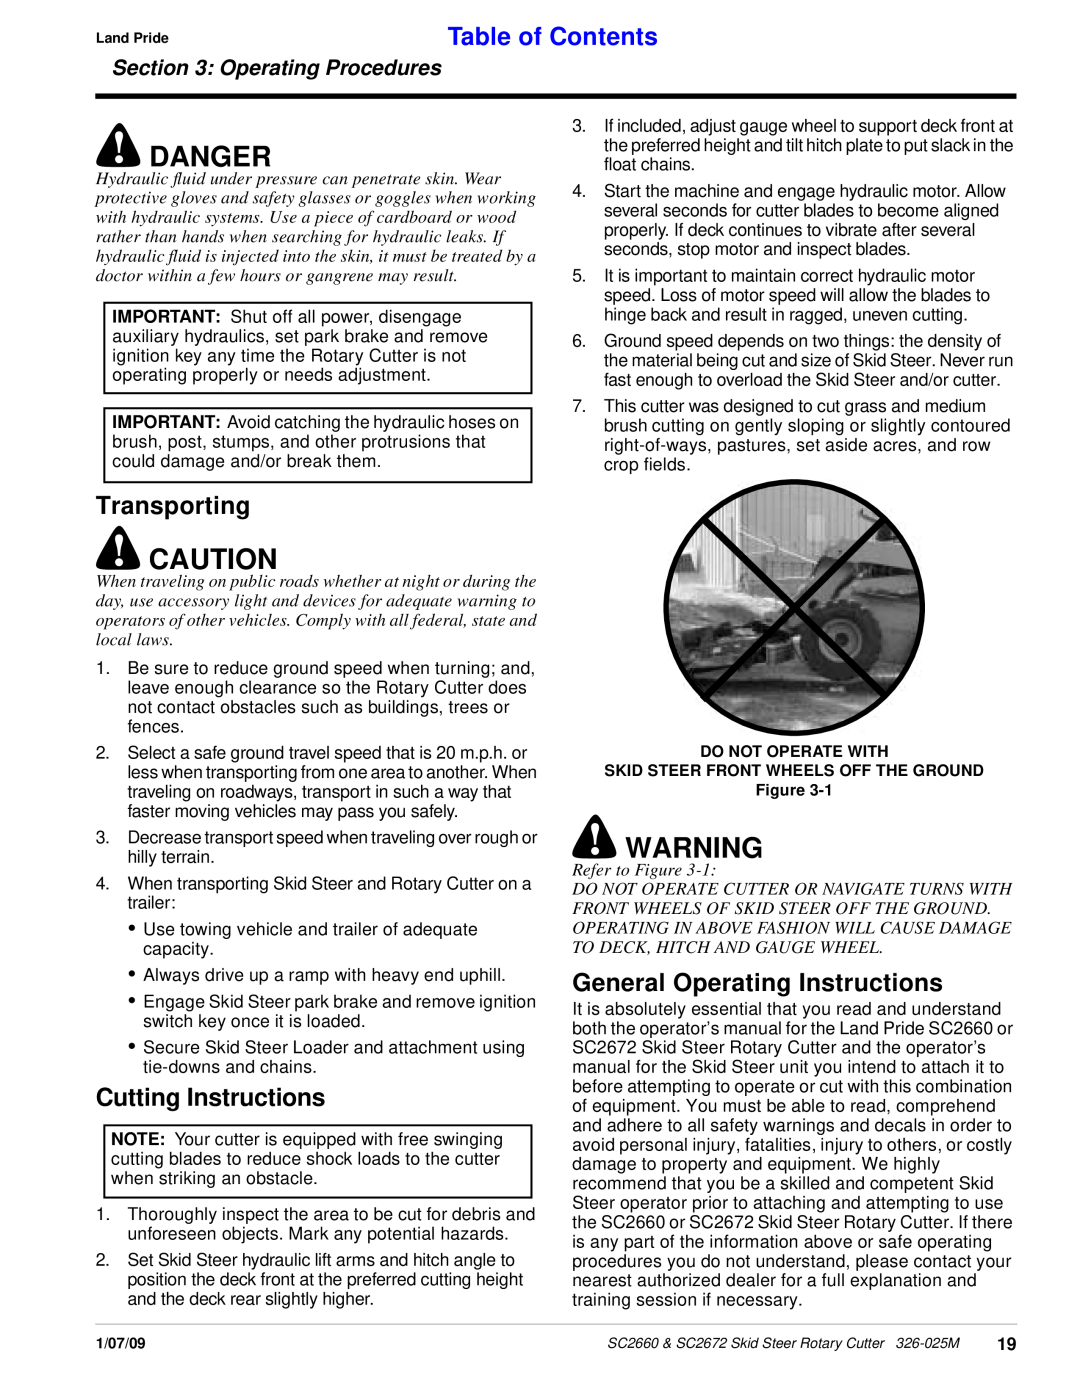 Land Pride SC2672, SC2660 Transporting, Cutting Instructions, General Operating Instructions, Danger, Table of Contents 